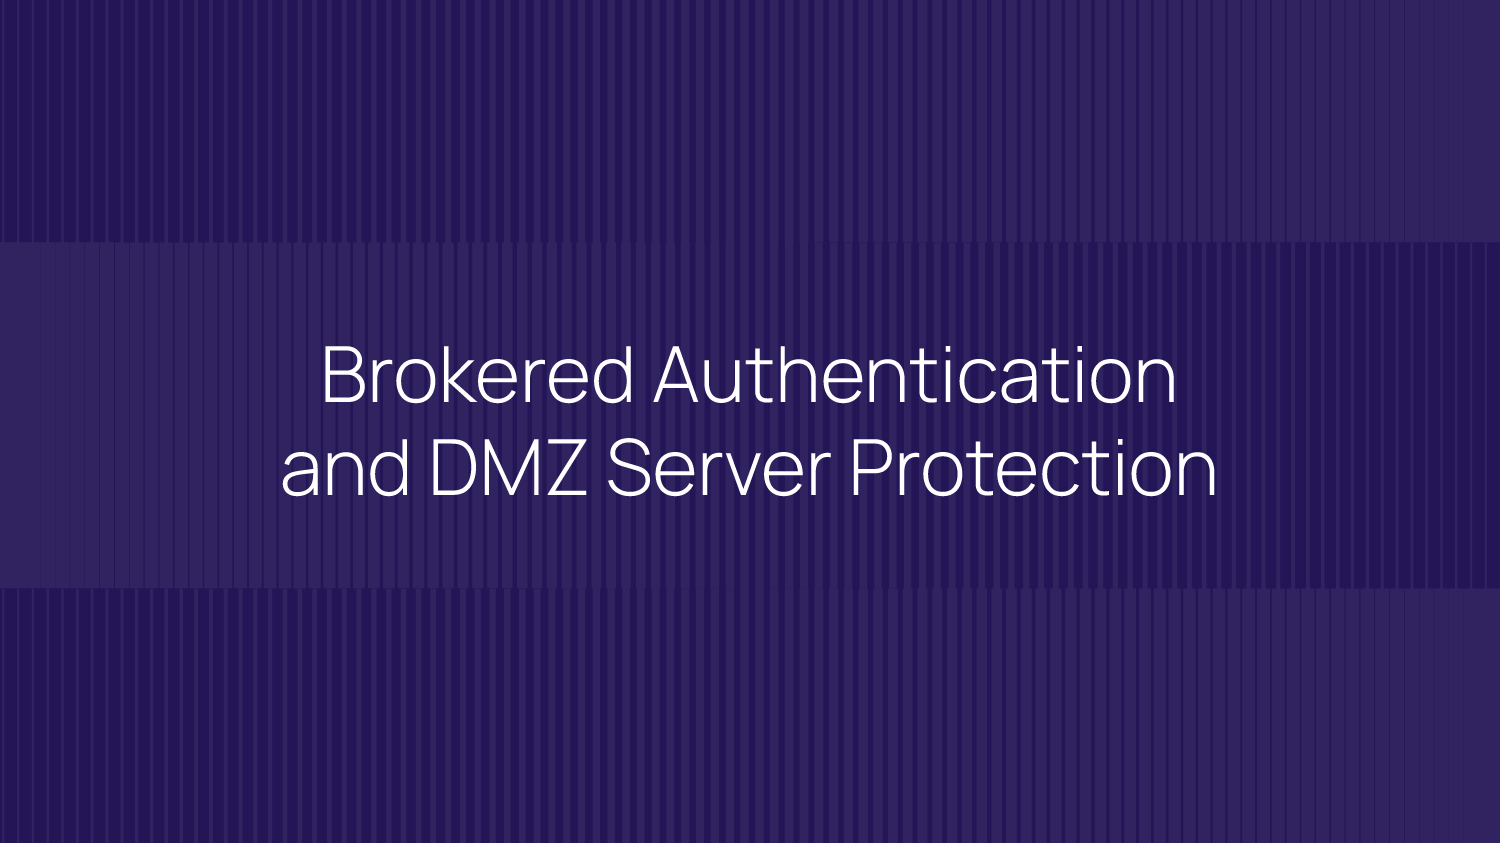 Brokered Authentication and DMZ Server Protection